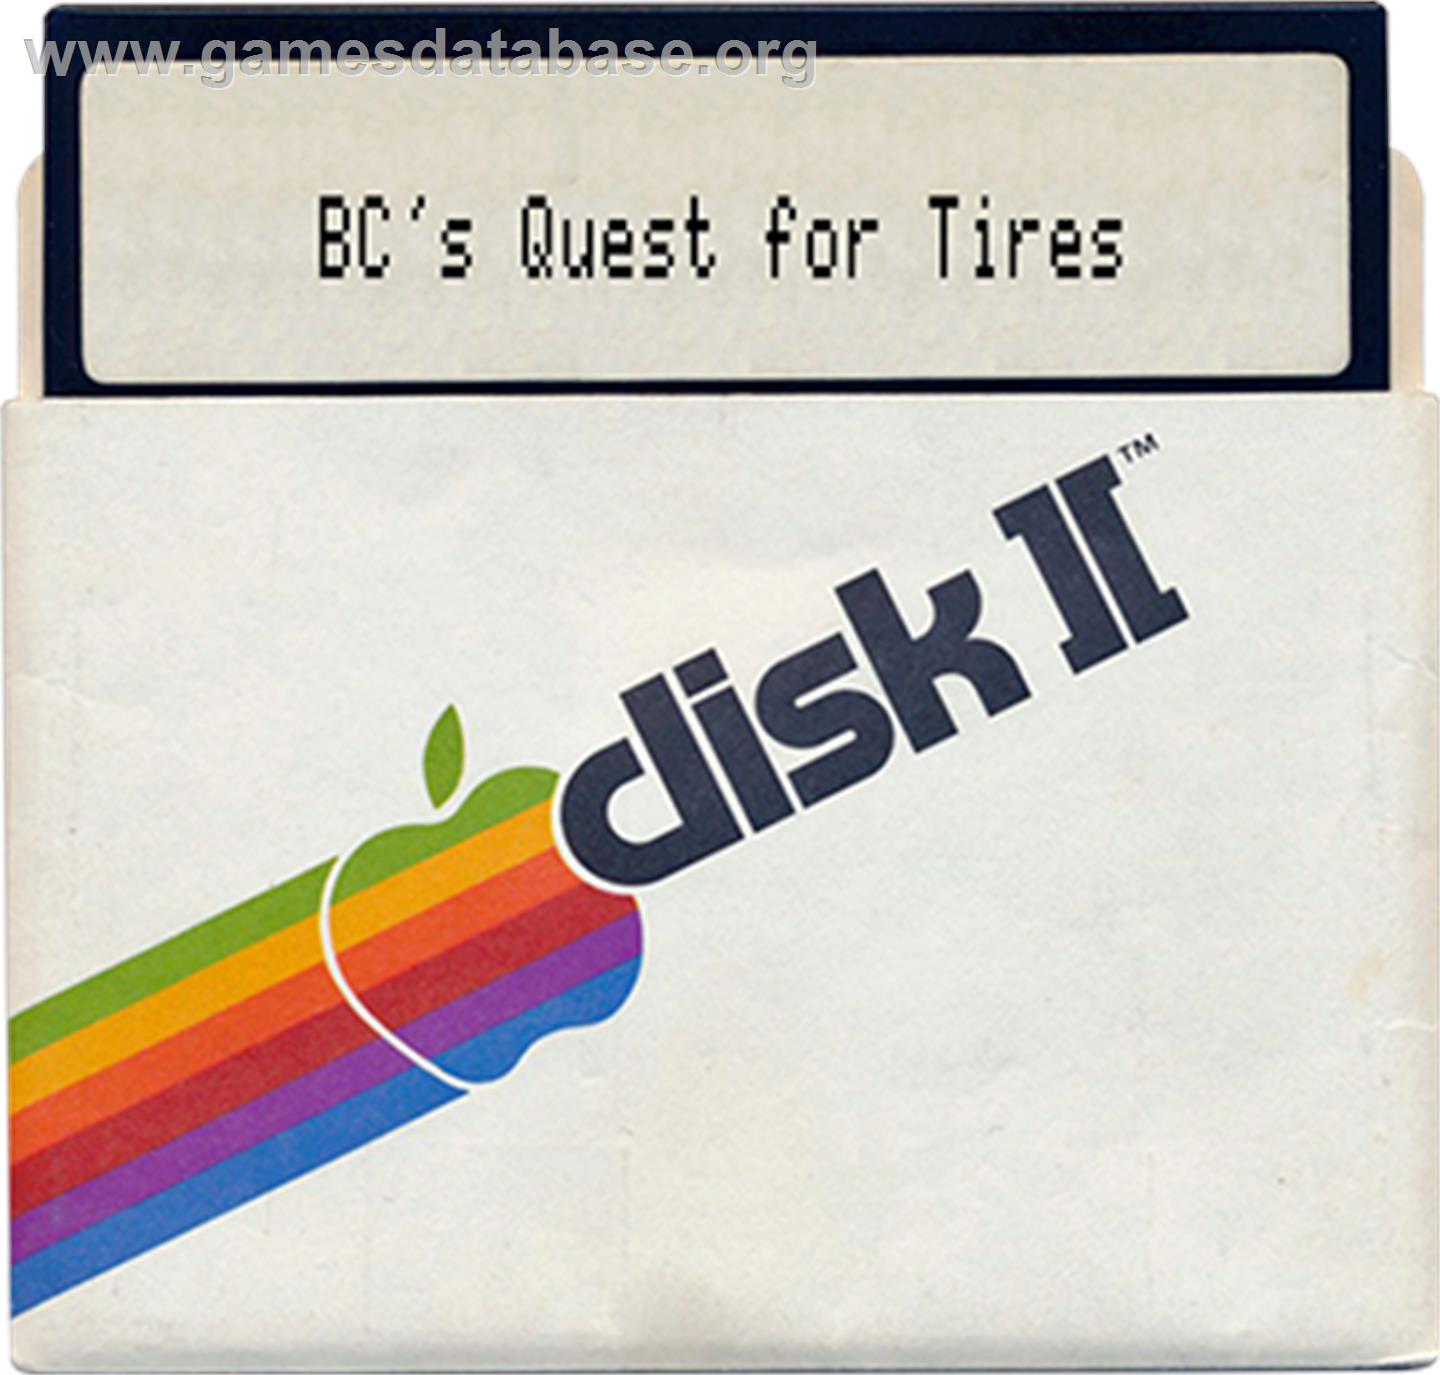 BC's Quest for Tires - Apple II - Artwork - Disc